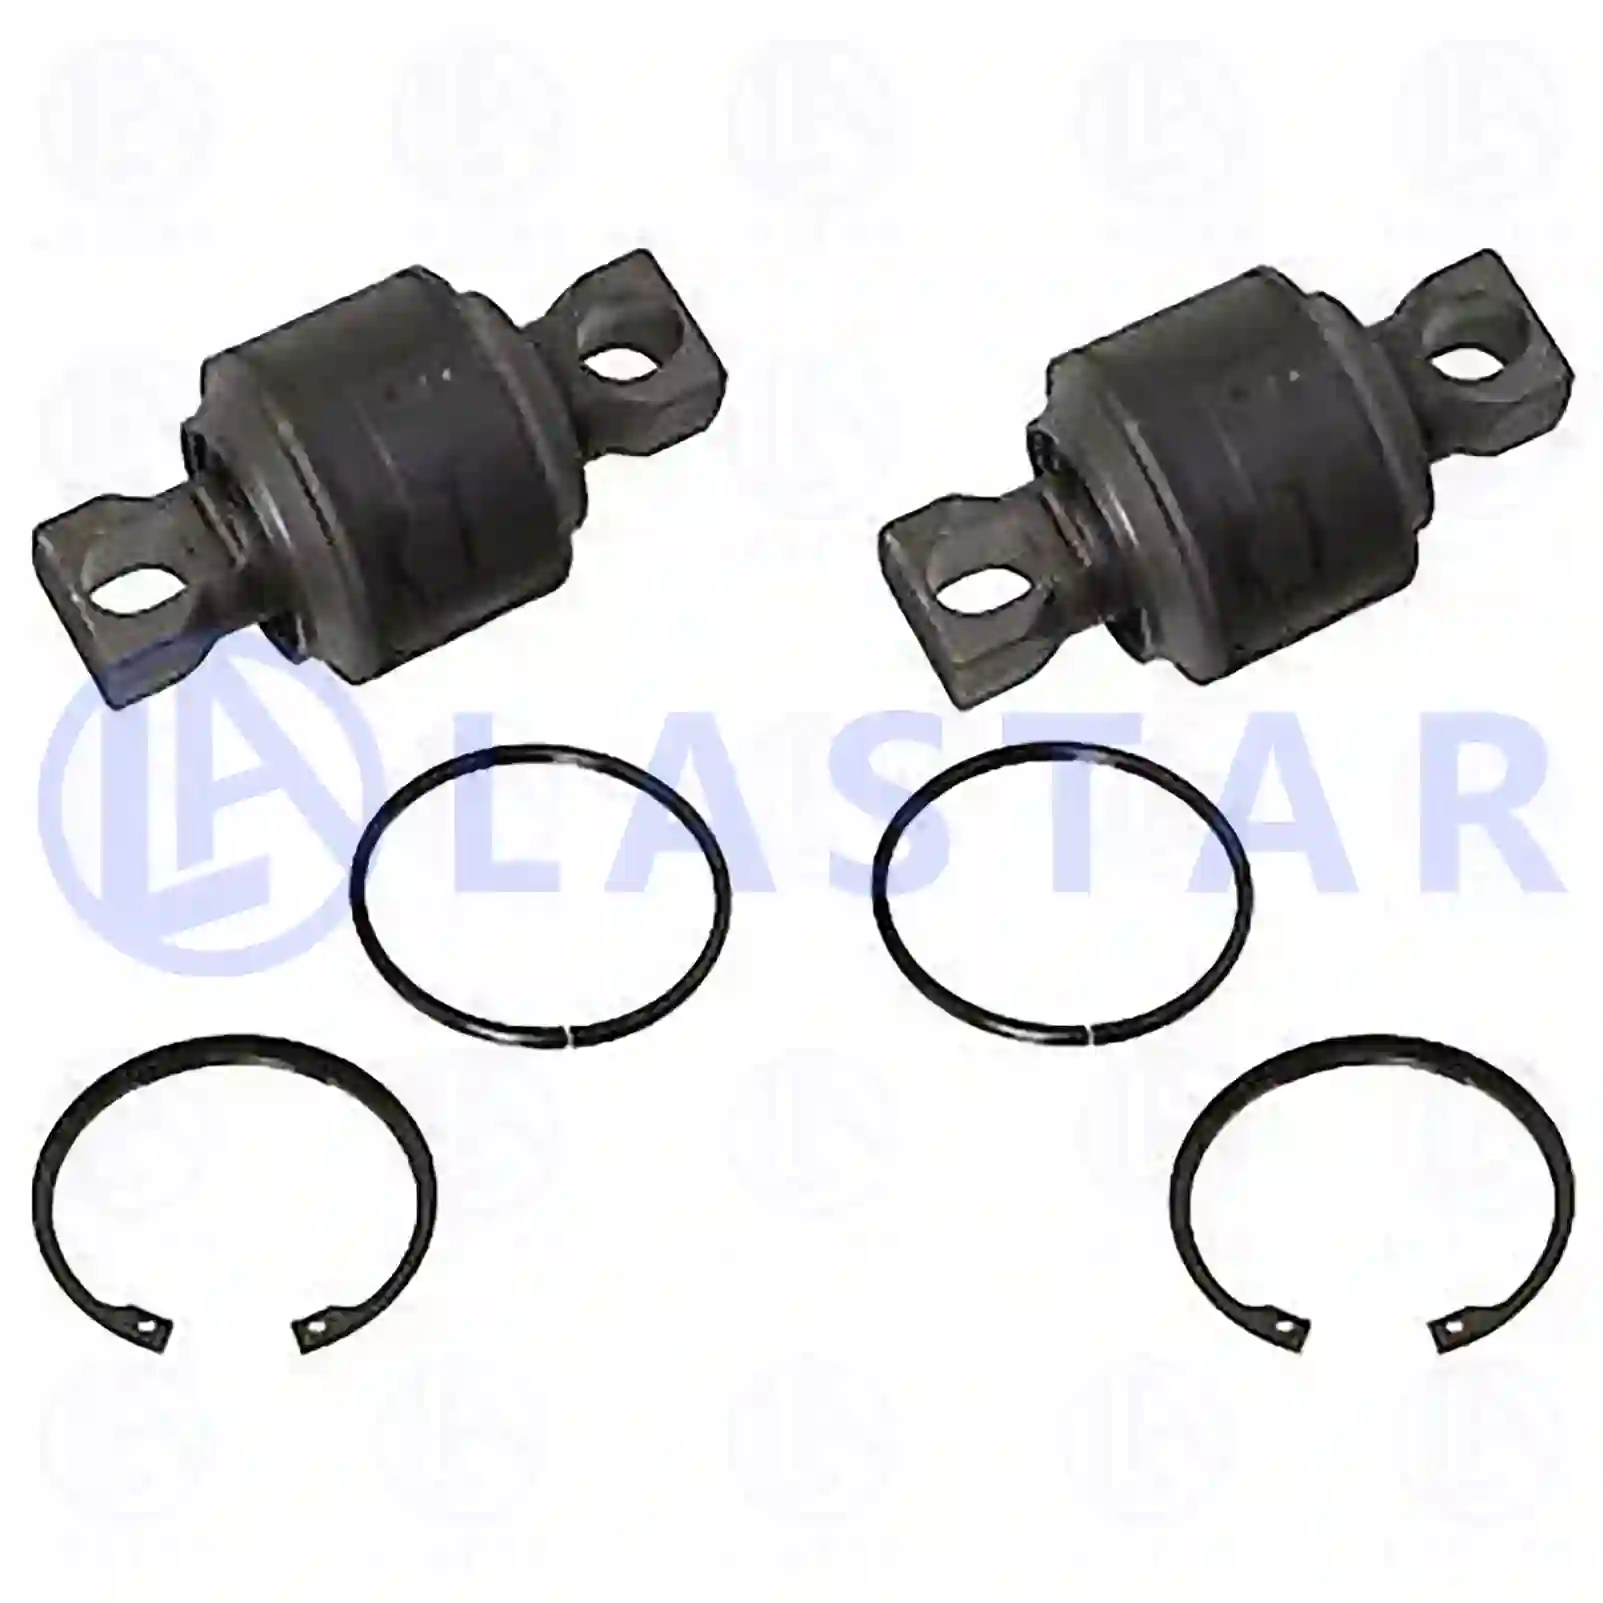 Repair kit, v-stay, 77729935, 3093630, 3093631, , , , , ||  77729935 Lastar Spare Part | Truck Spare Parts, Auotomotive Spare Parts Repair kit, v-stay, 77729935, 3093630, 3093631, , , , , ||  77729935 Lastar Spare Part | Truck Spare Parts, Auotomotive Spare Parts